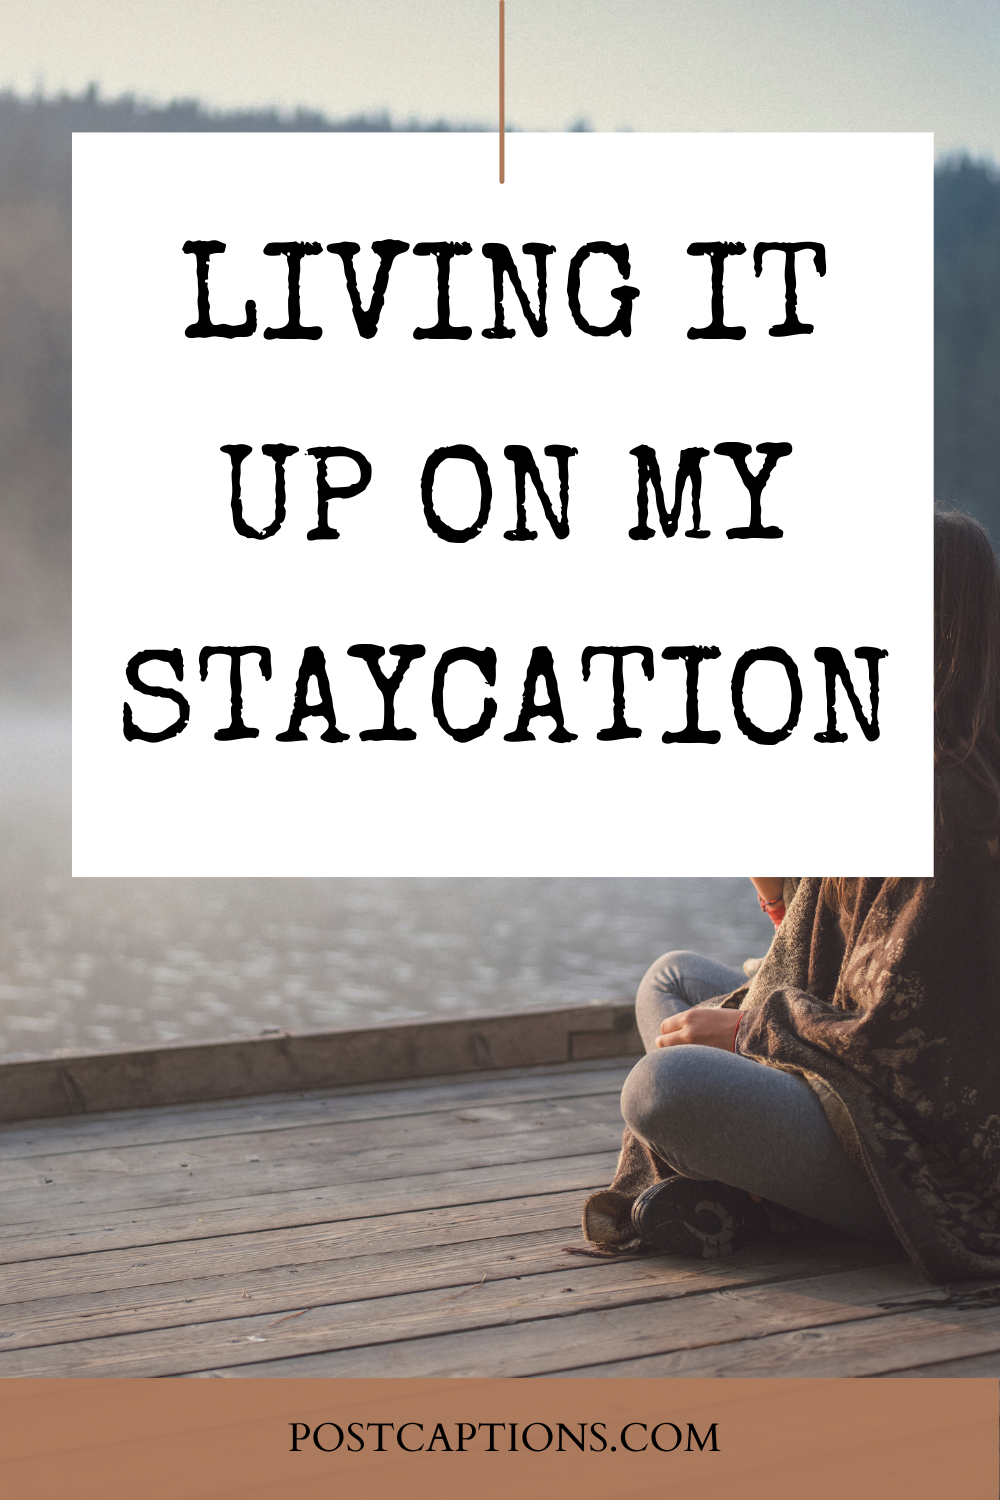 Staycation Instagram Captions